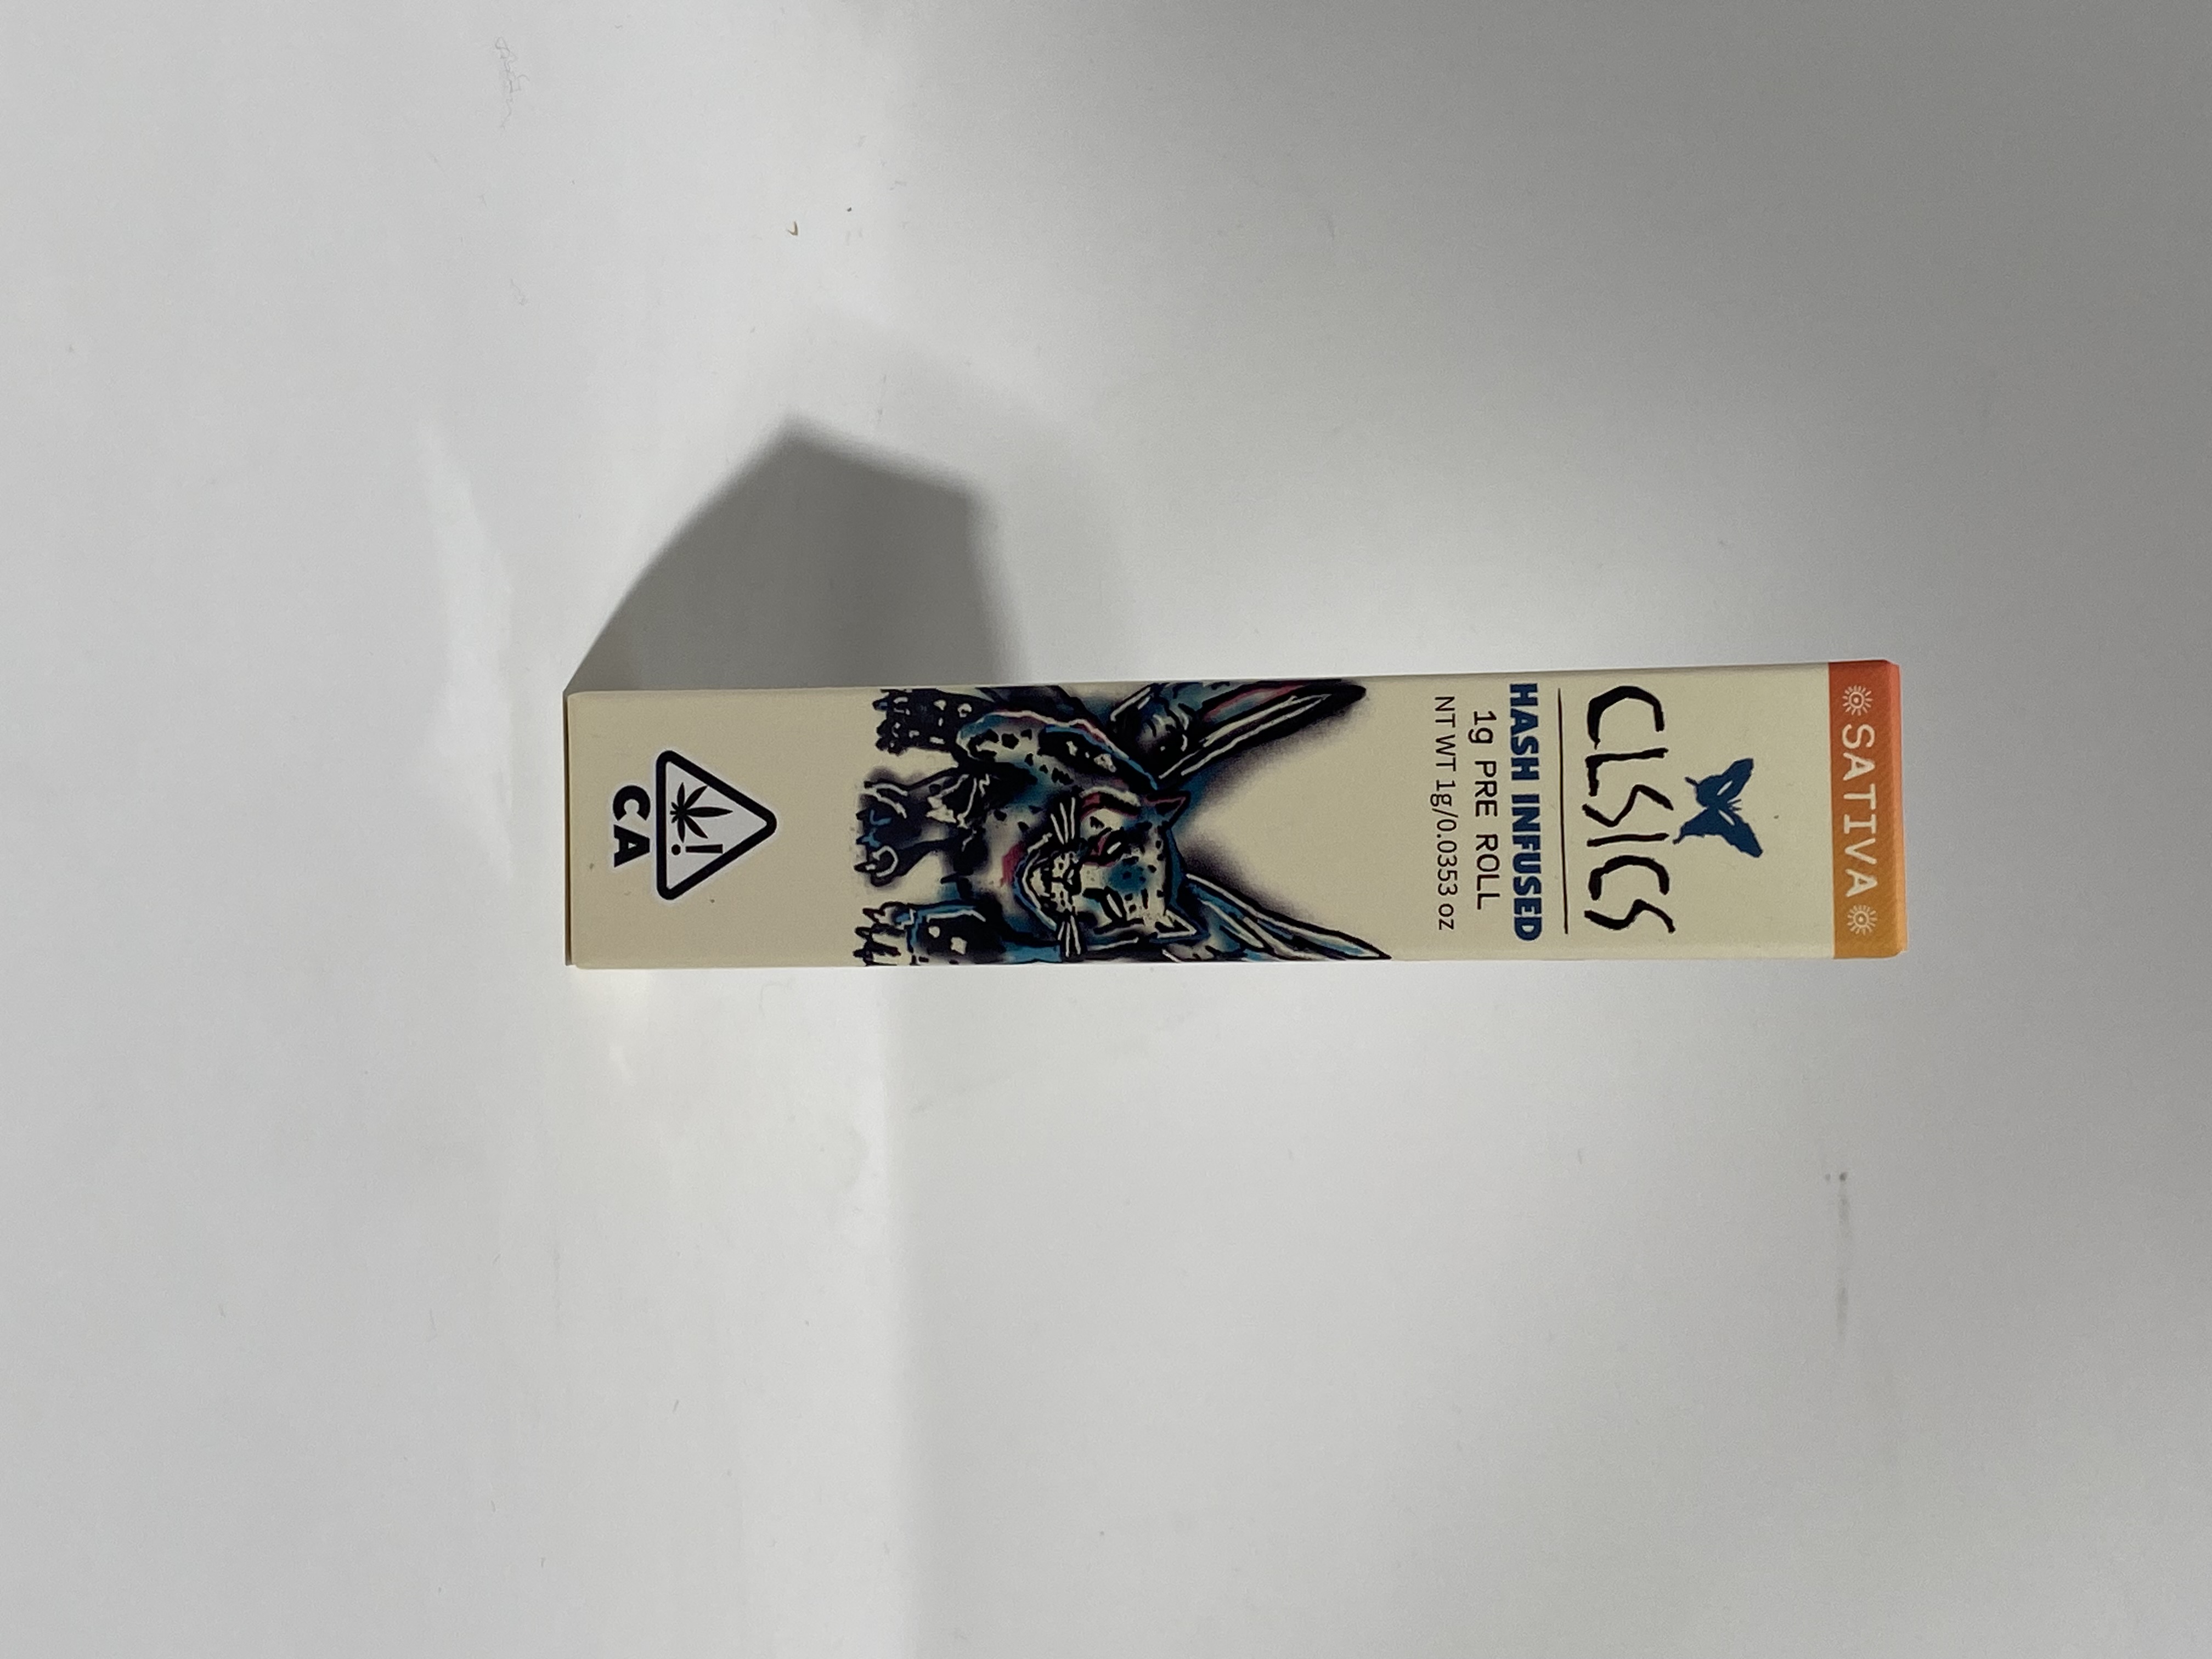 A photograph of CLSICS Hash Preroll 1g Sativa Pacific Cooler